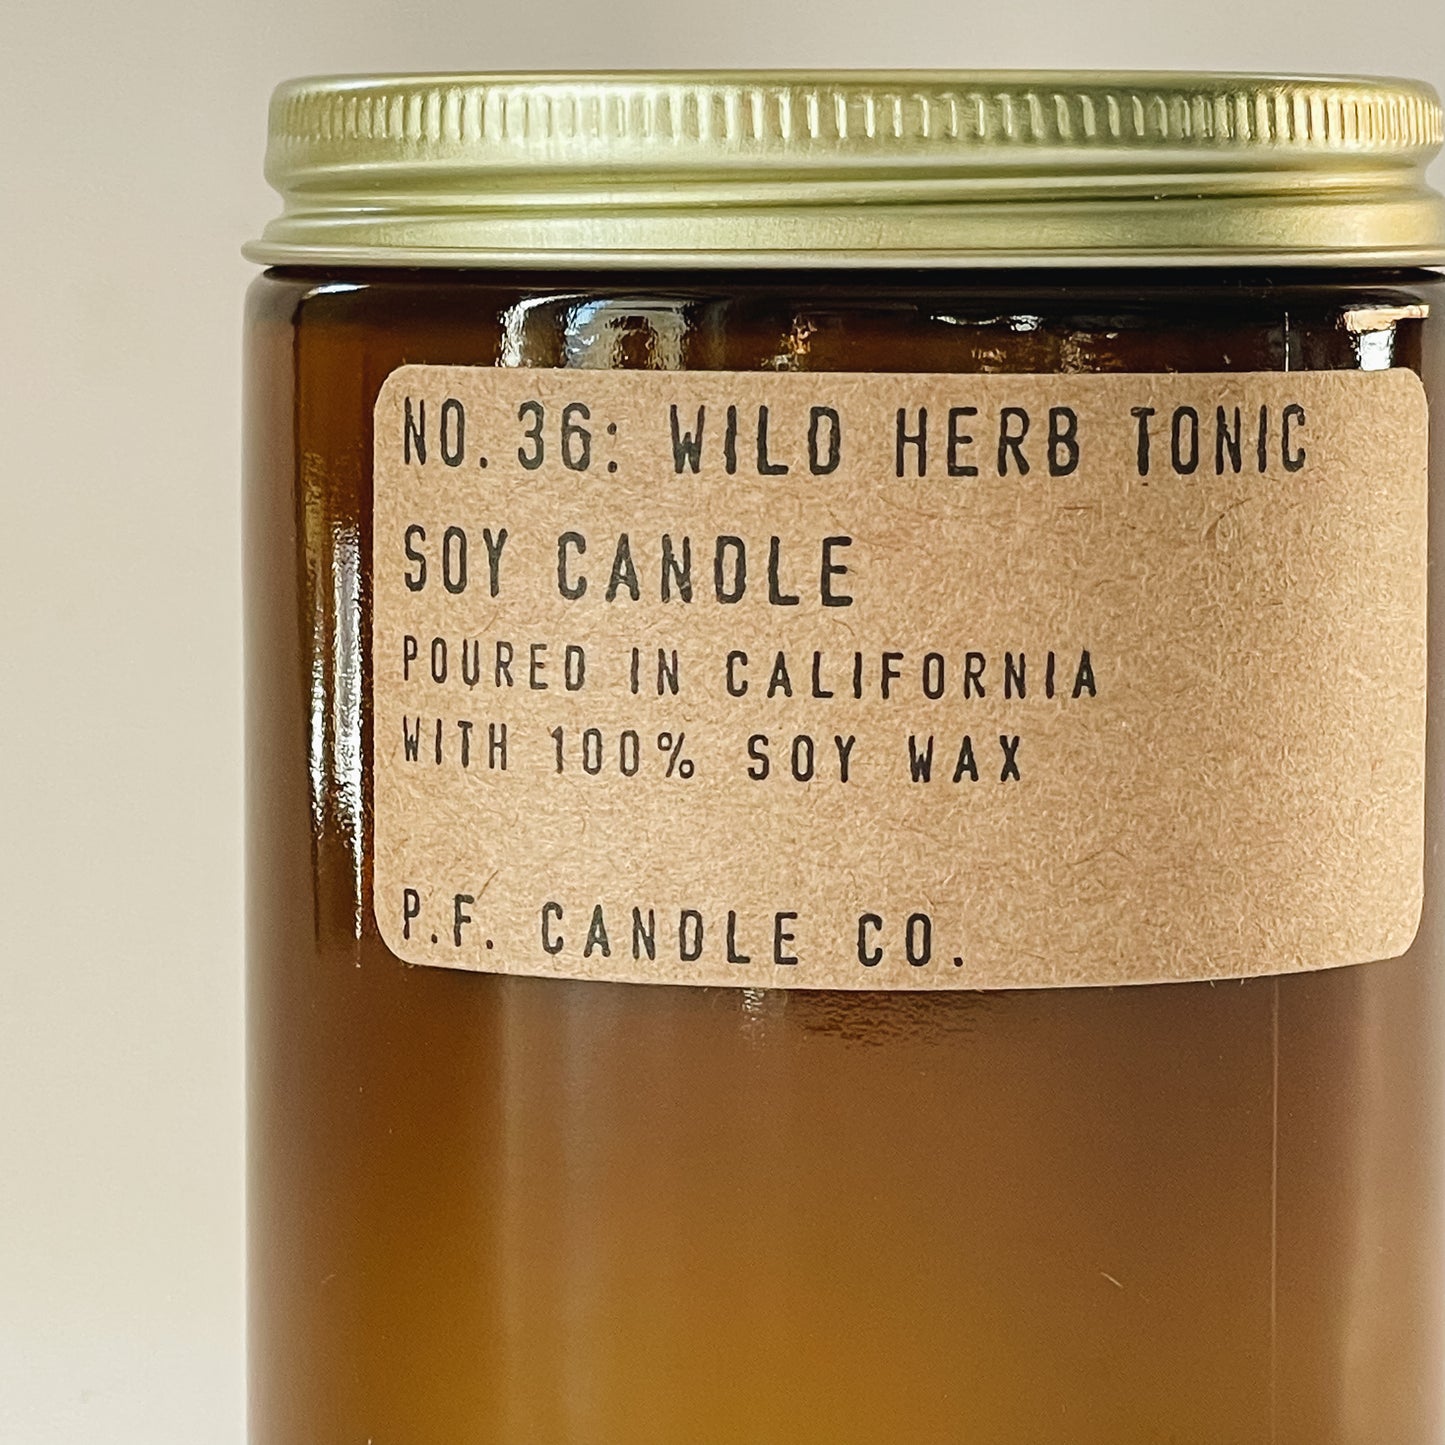 P.F. Candle Co. Soy Candle | Wild Herb Tonic